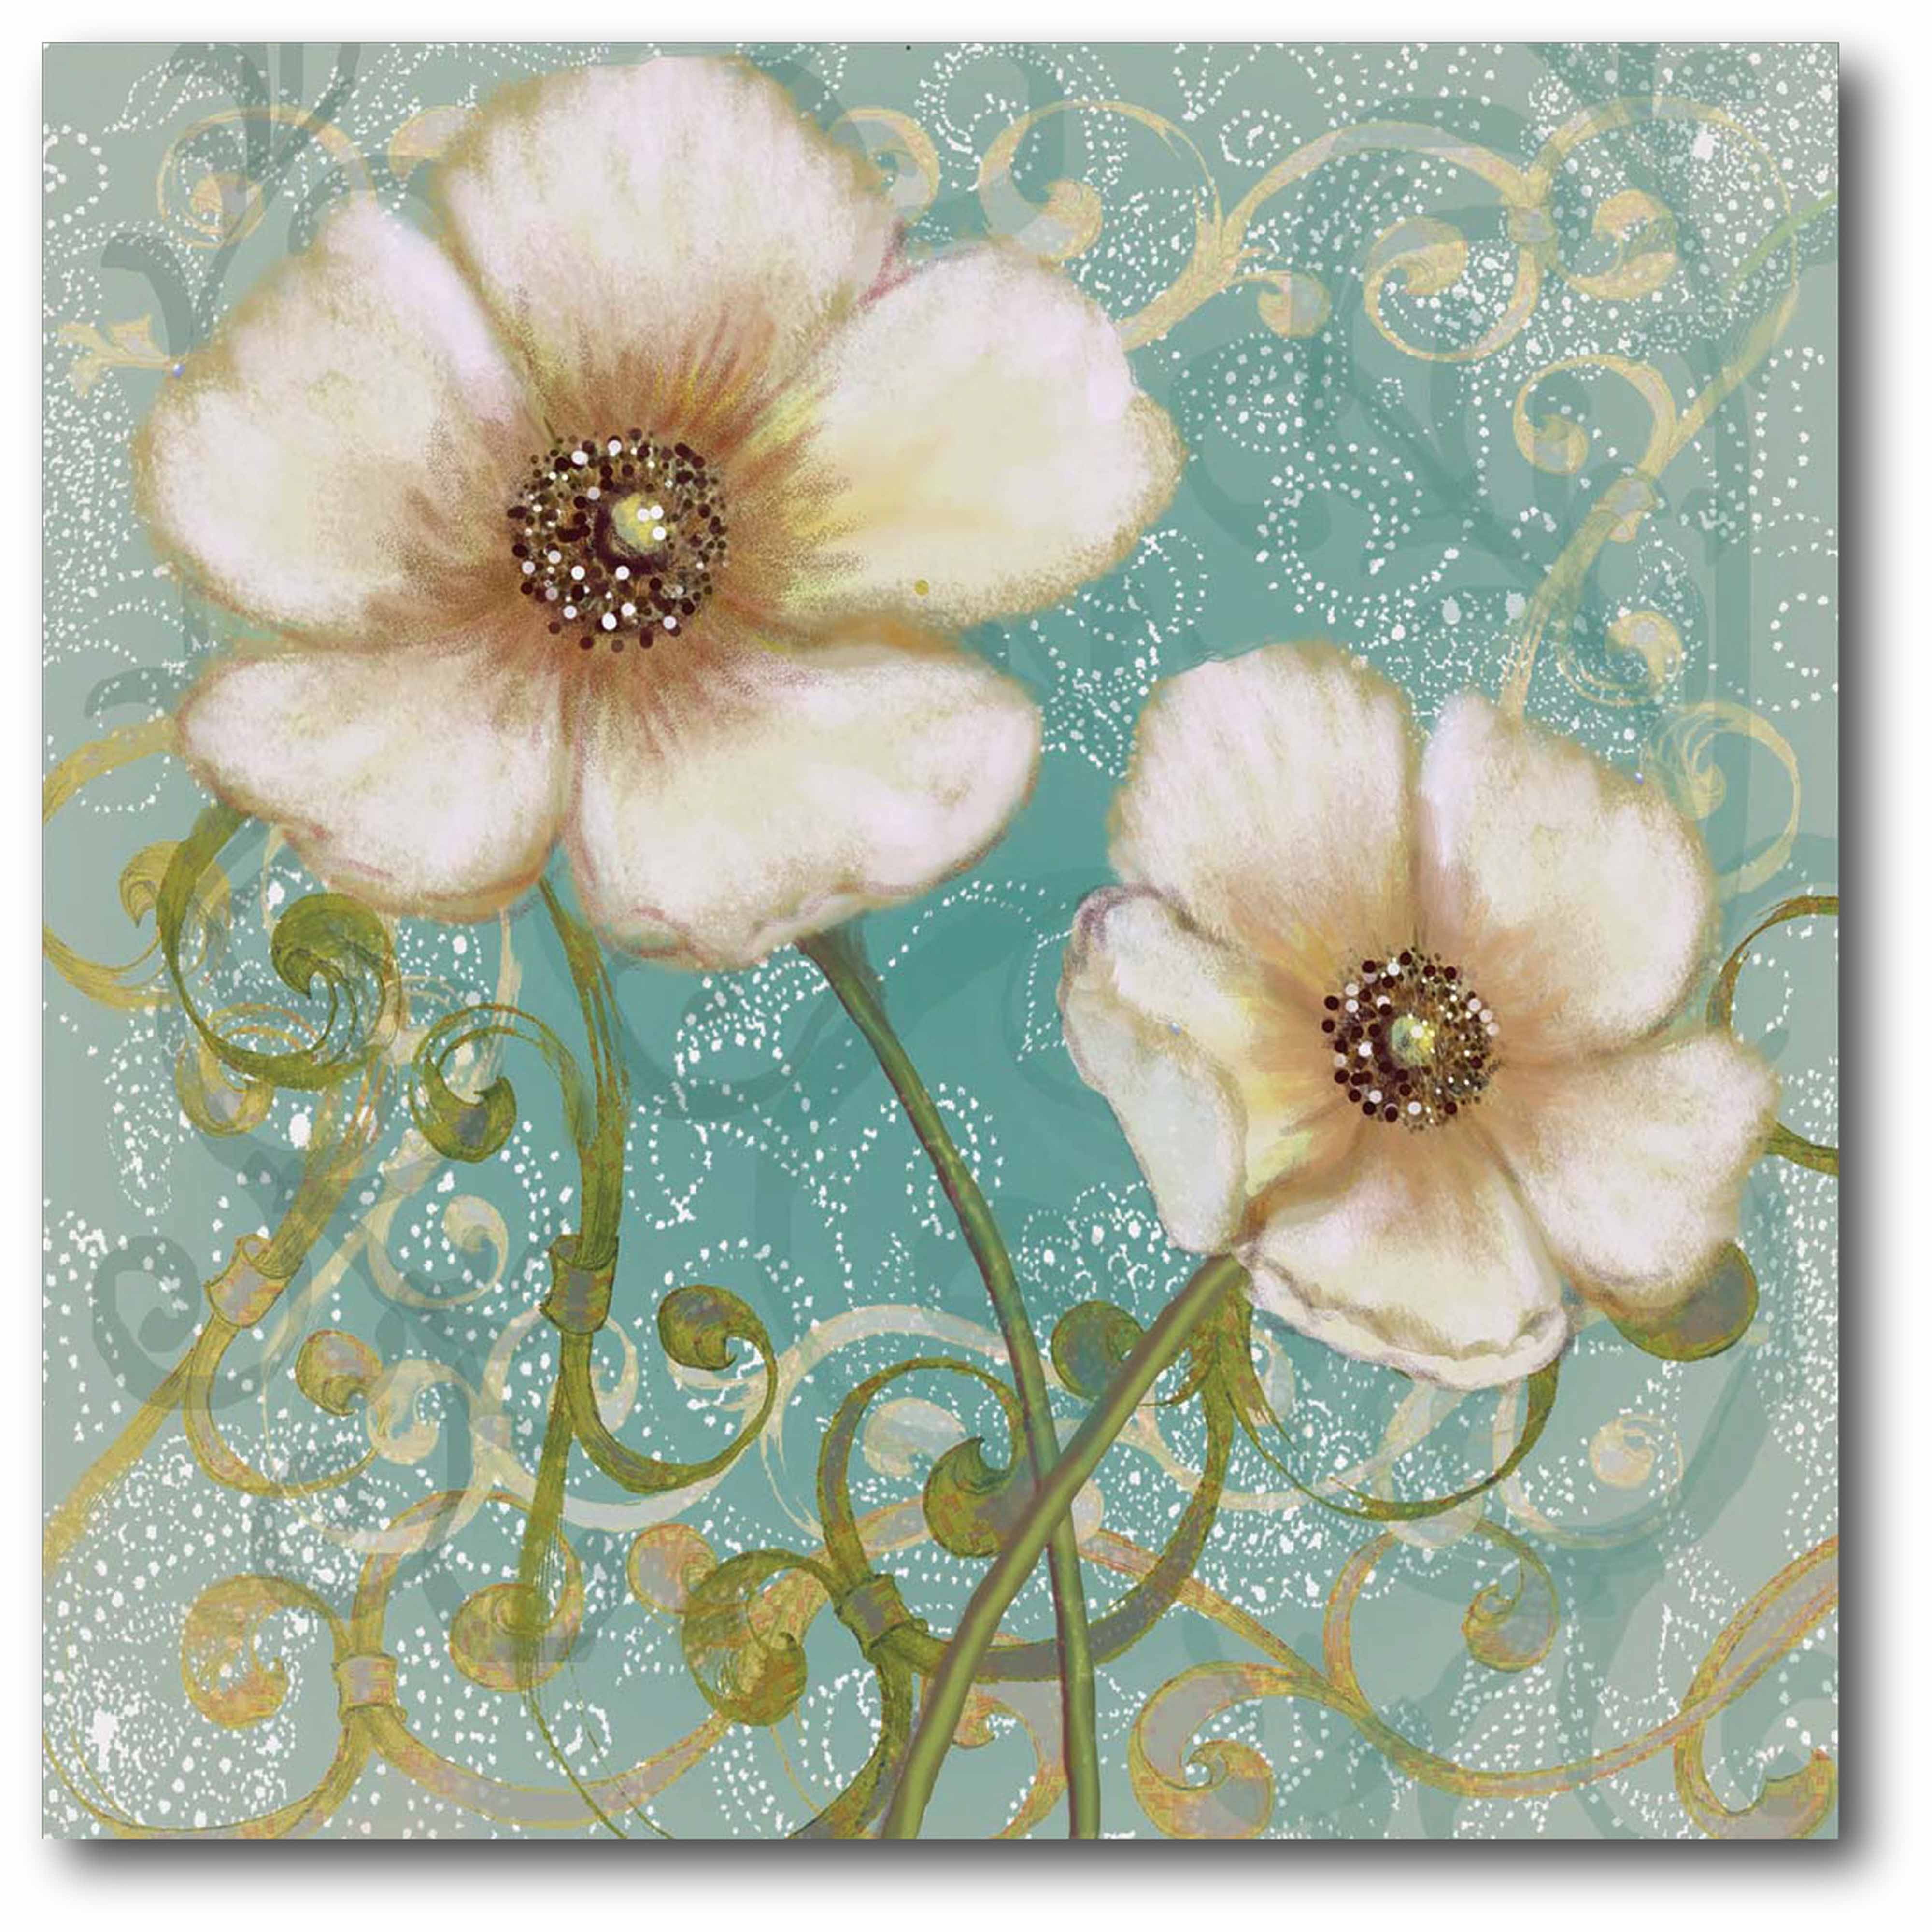 Flower Tea Stained Tropical Flower Botanical Large 16 x 20 Canvas-Wrapped Frame Print